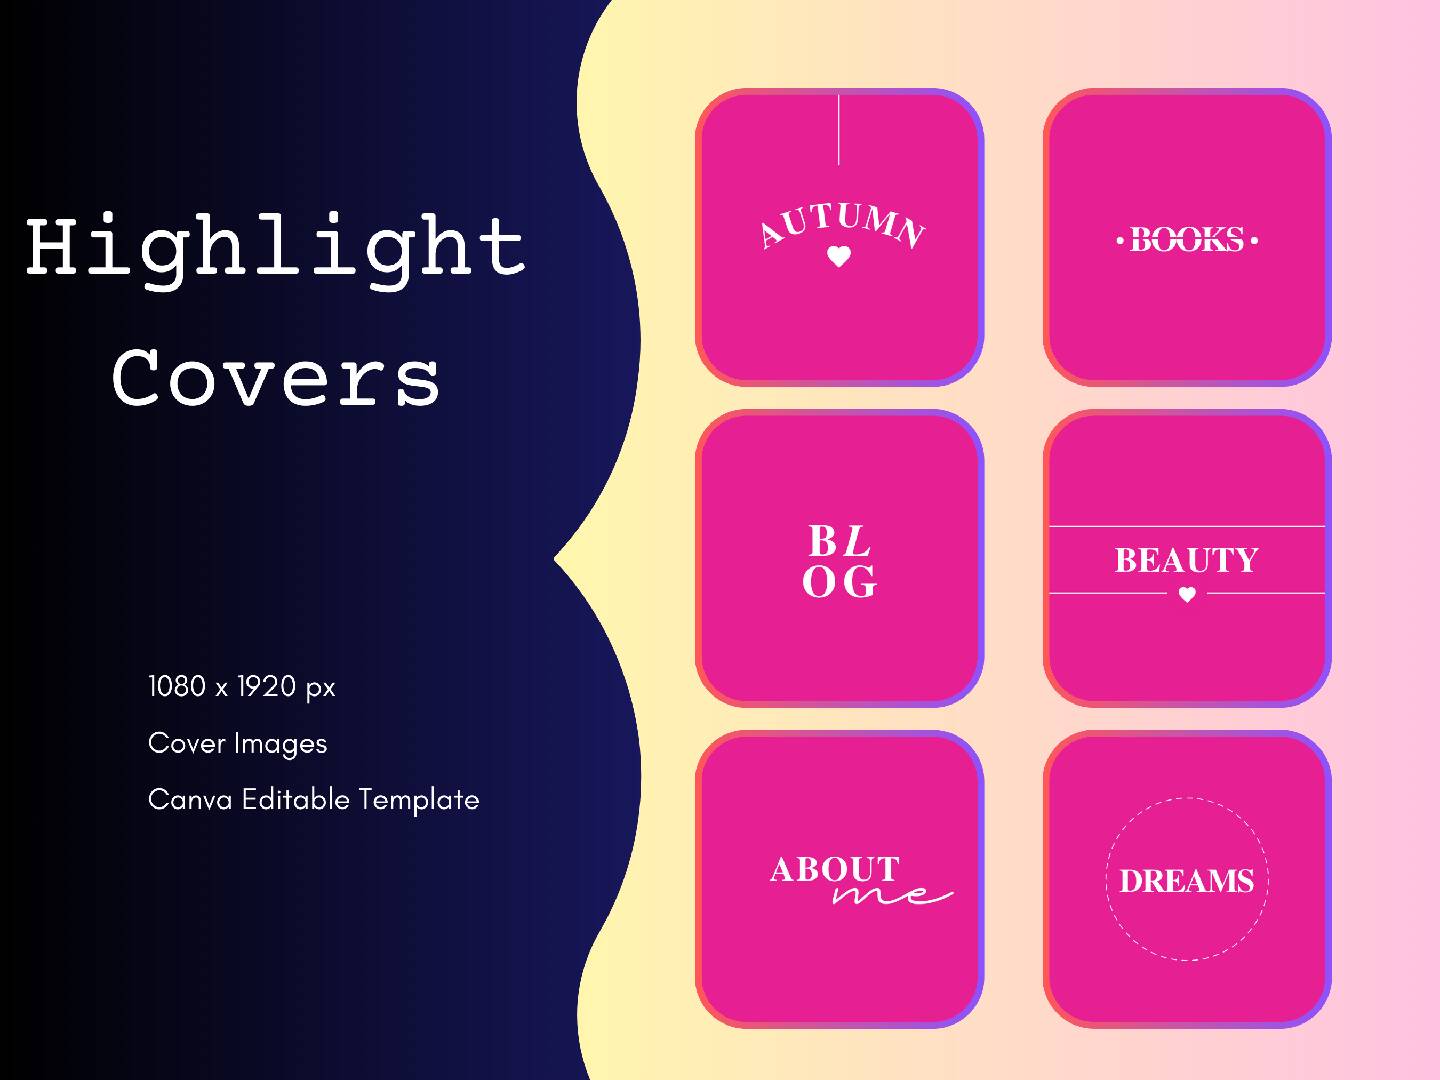 40+ Pink Instagram Highlight Covers